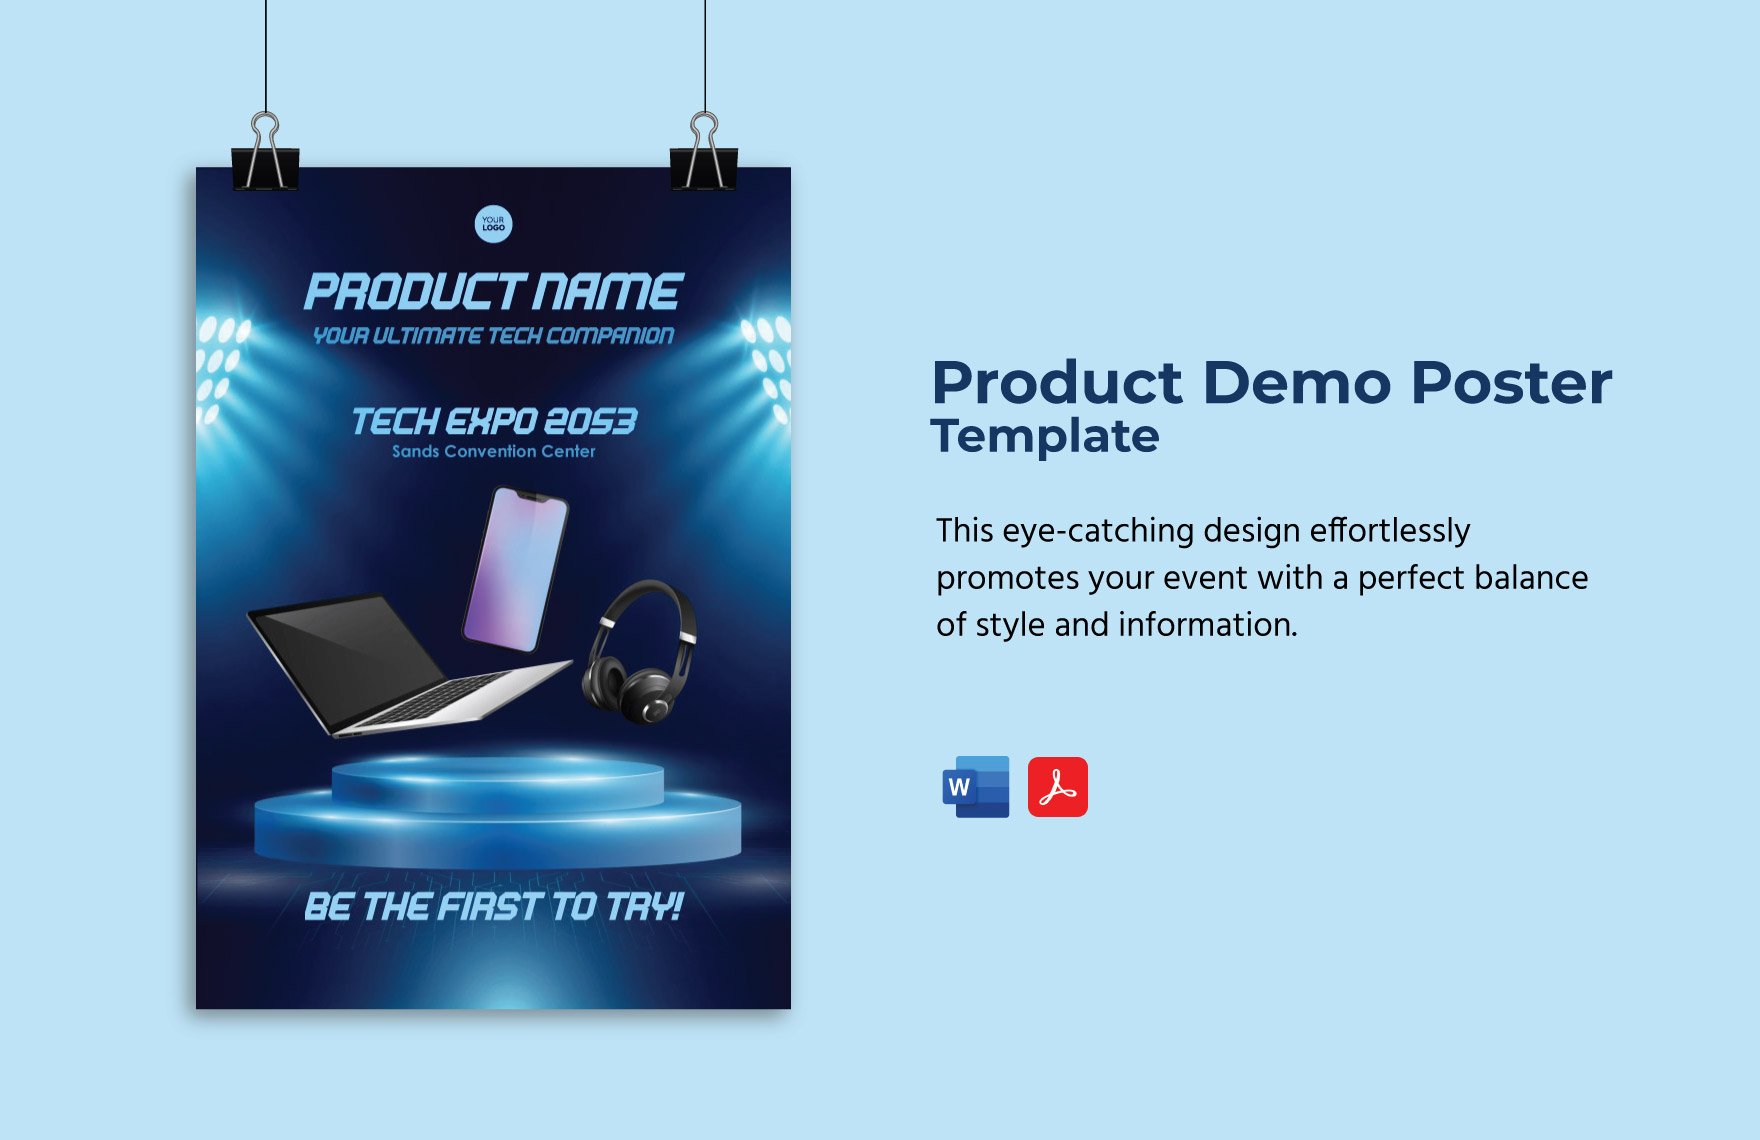 Product Demo Poster Template